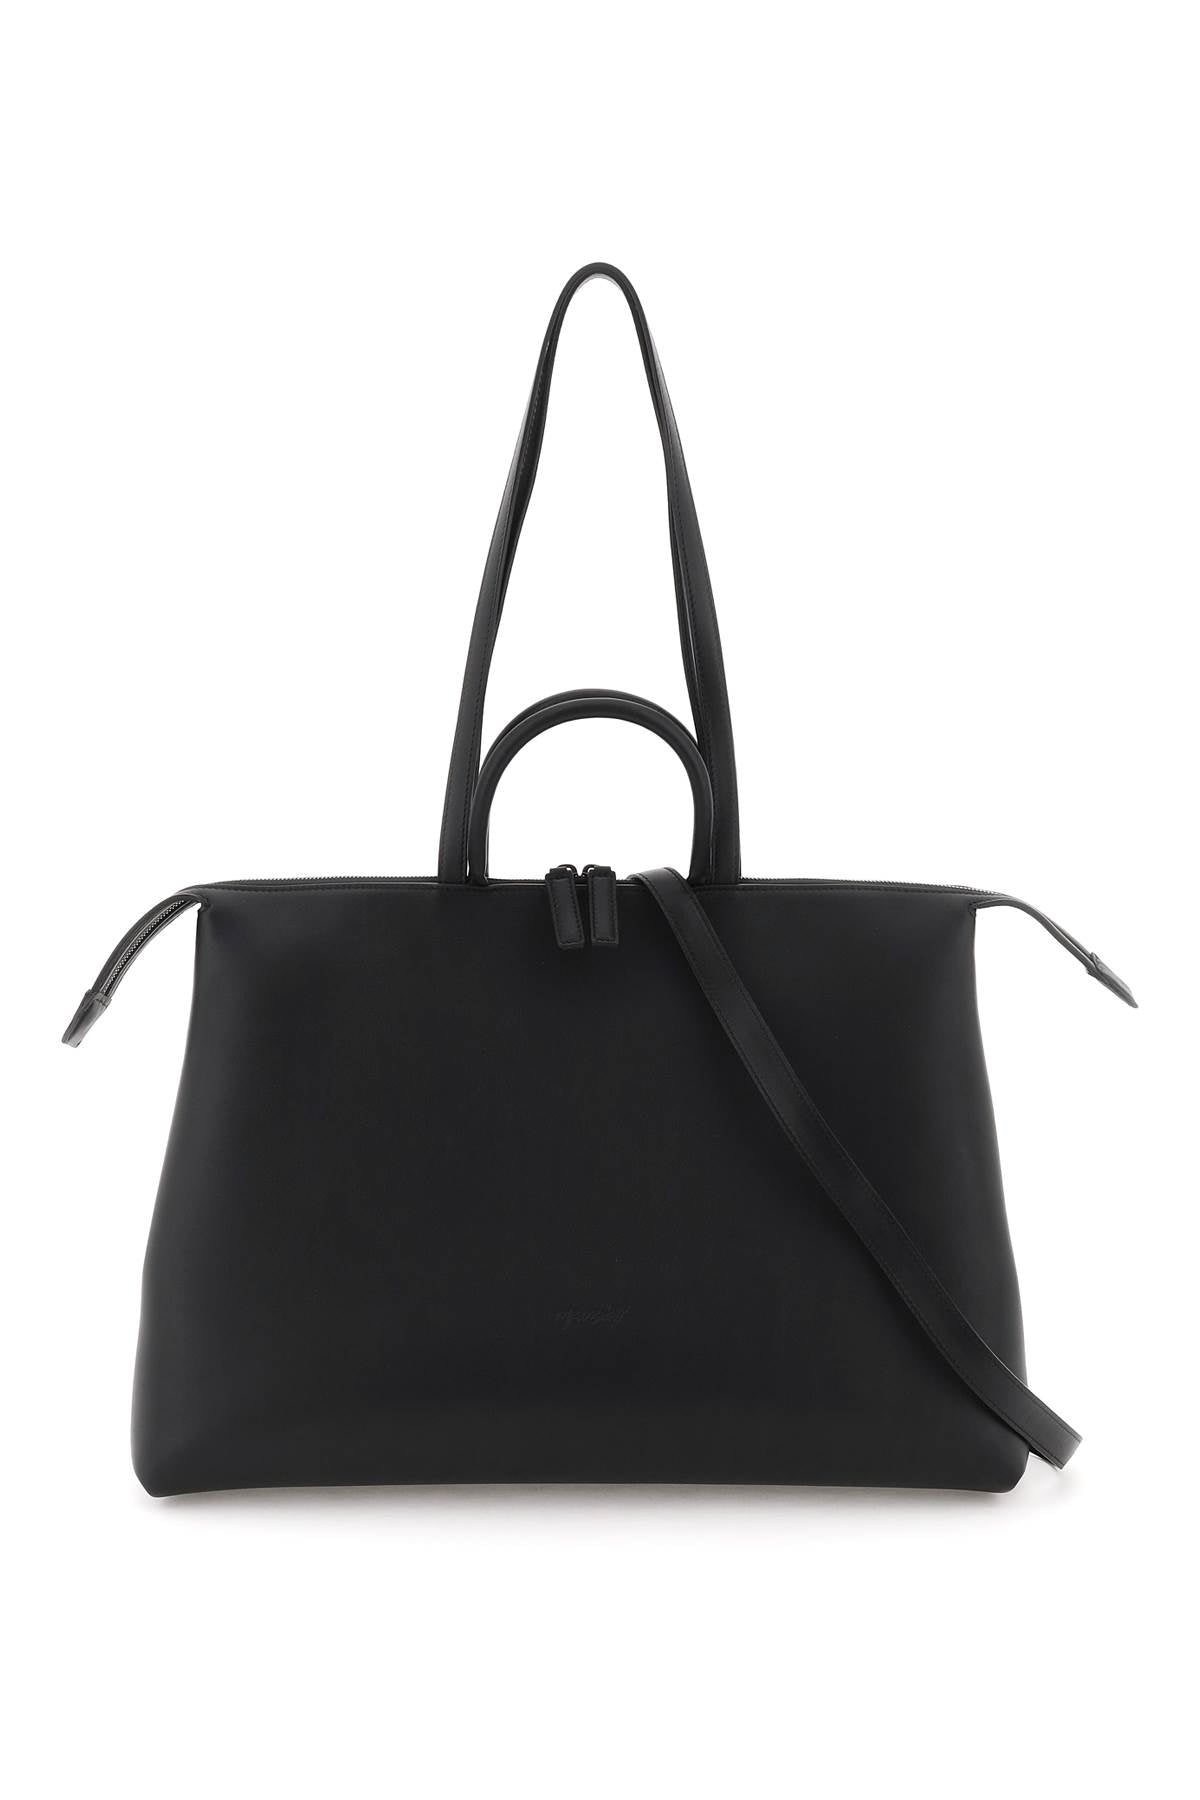 Marsell '4 In Orizzontale' Shoulder Bag   Nero